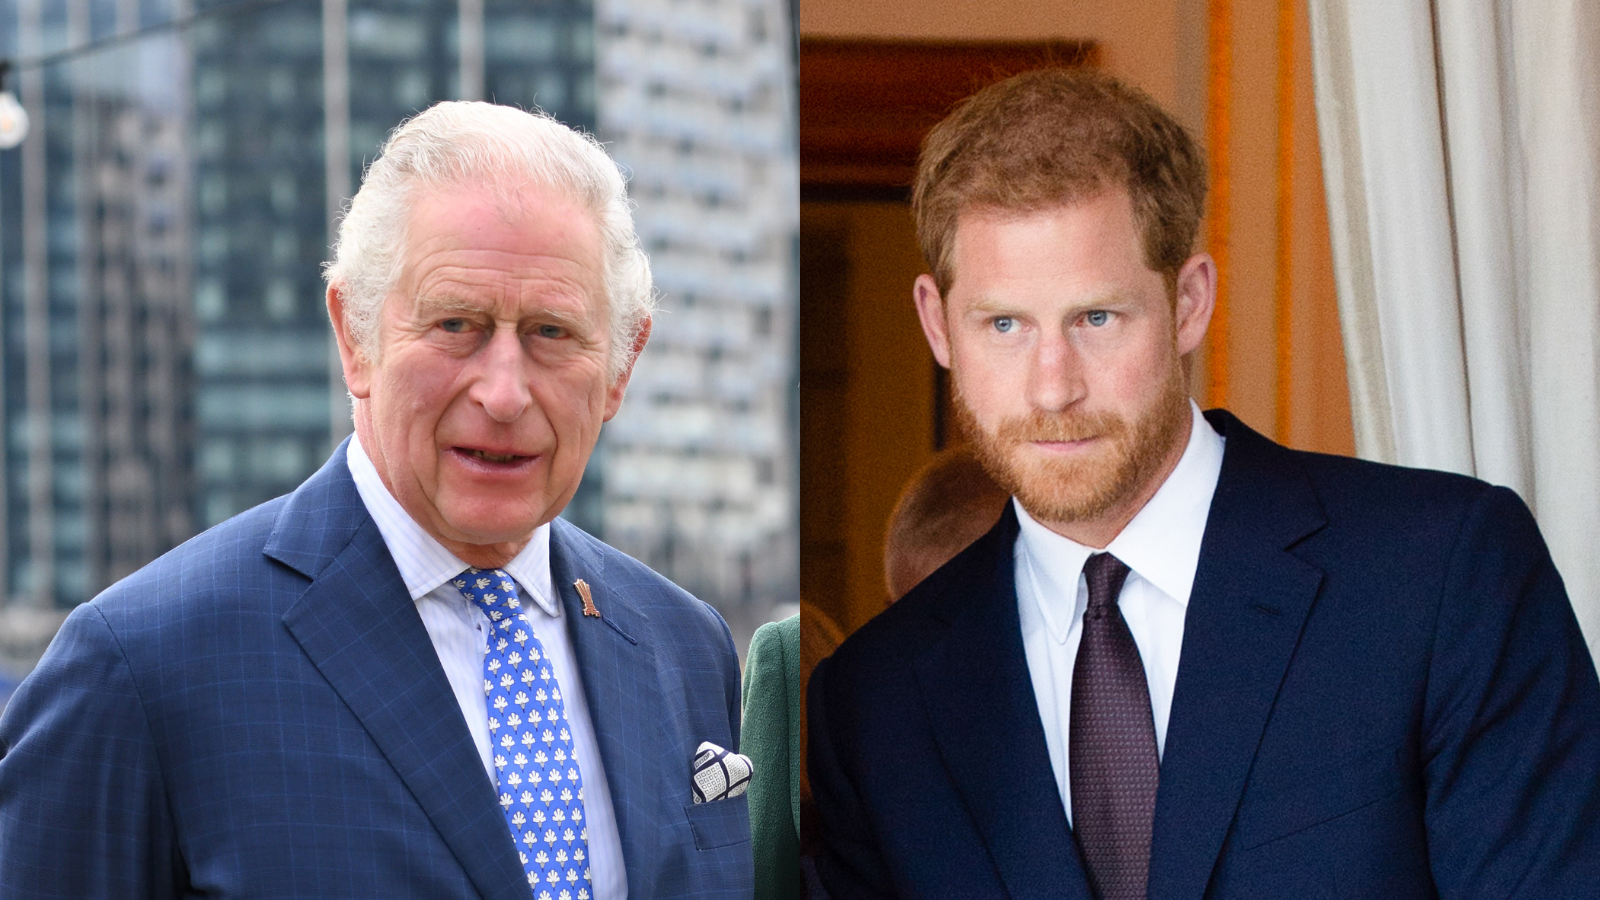 Princes Charles and Harry are under investigation by police